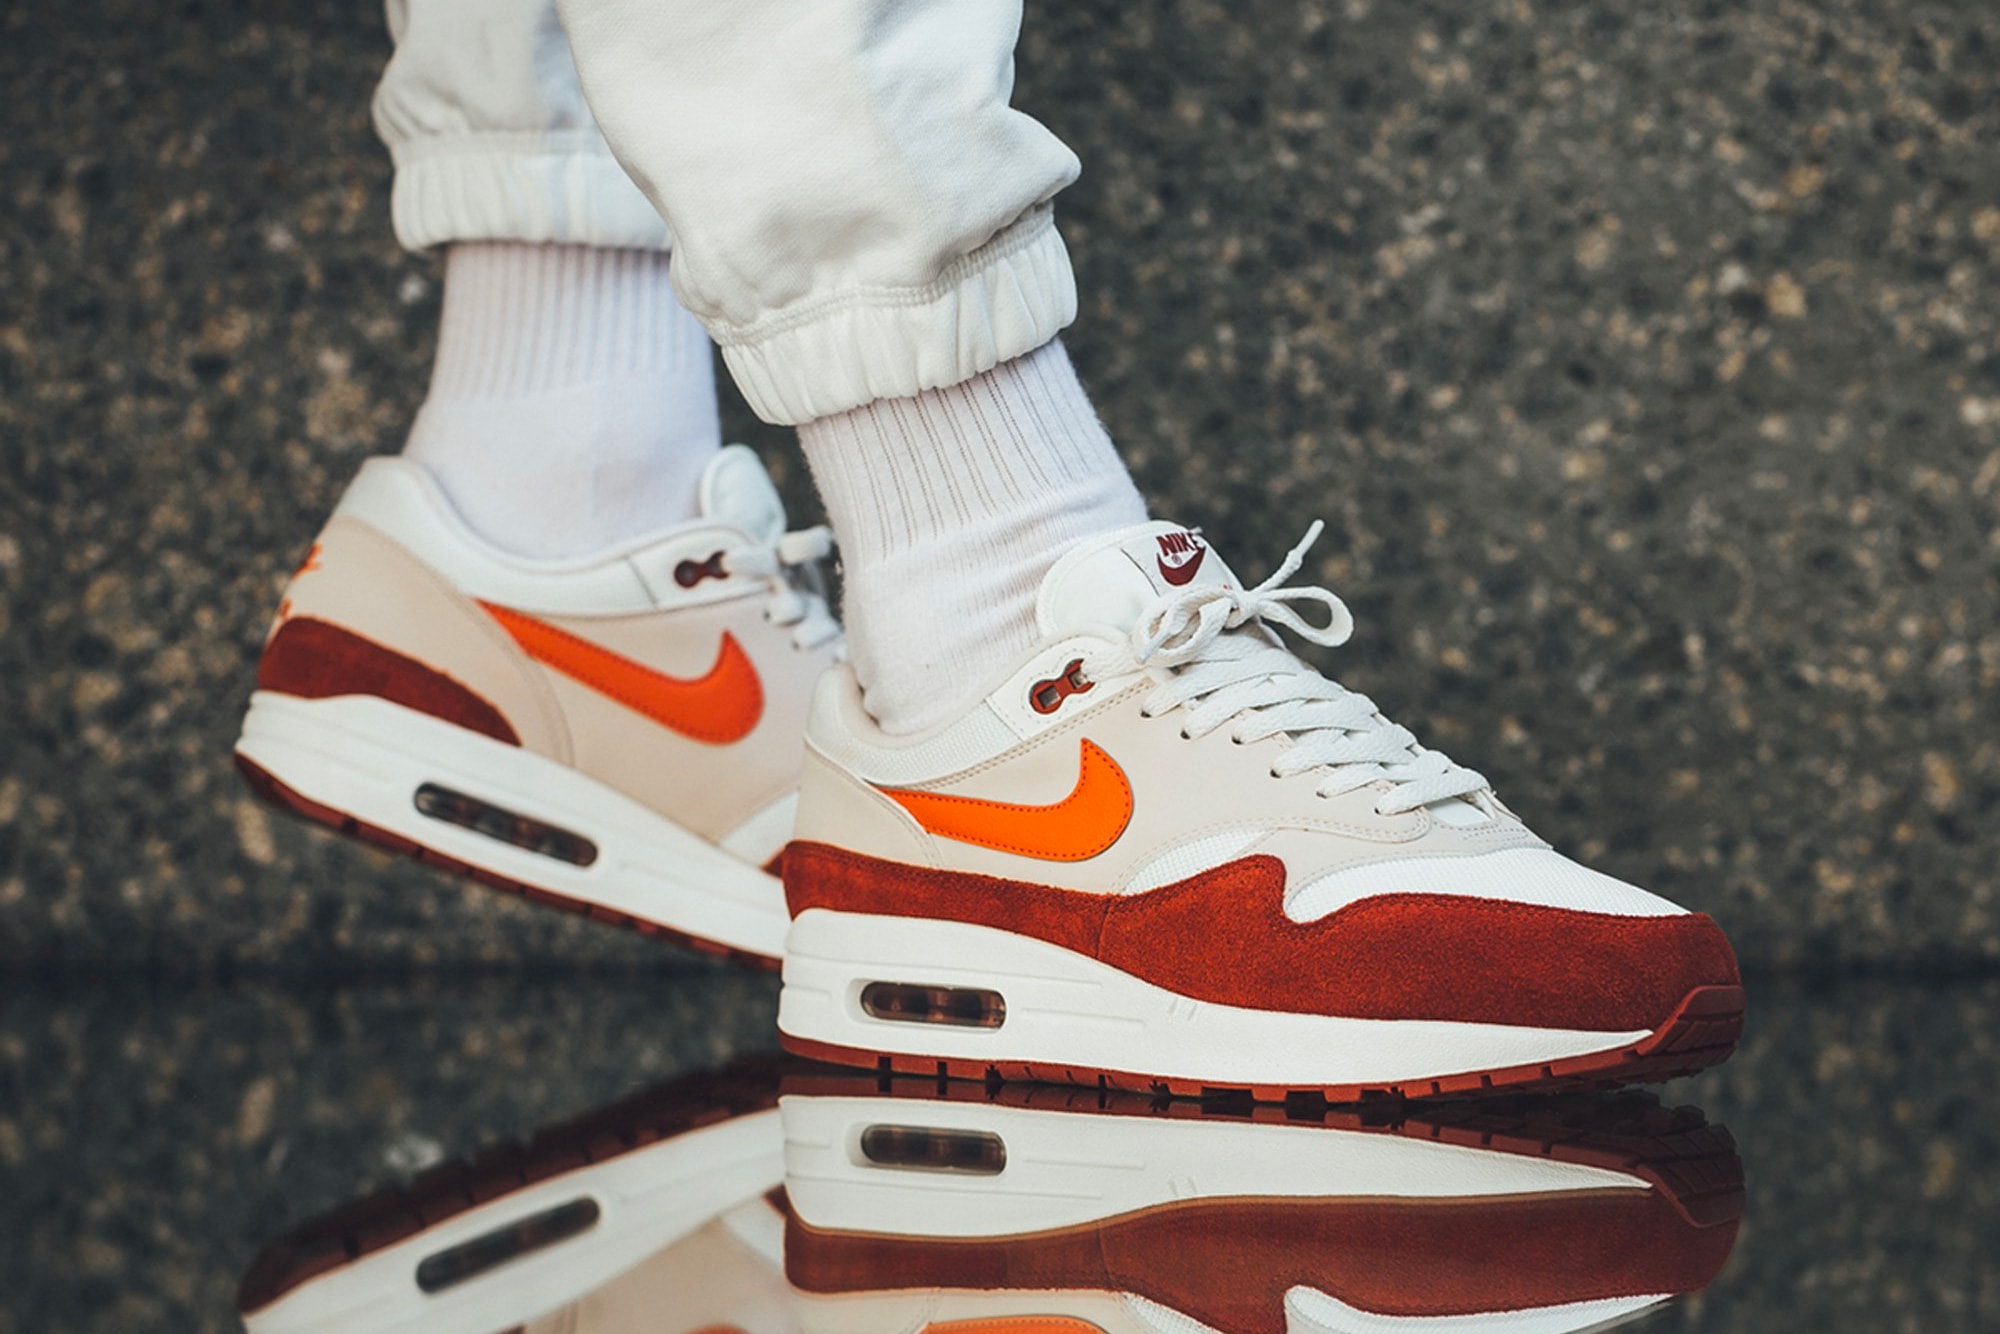 Nike Air Max 1 Curry On-Feet Vintage Coral Mars Stone release date drop info purchase price footwear sneaker summer 2018